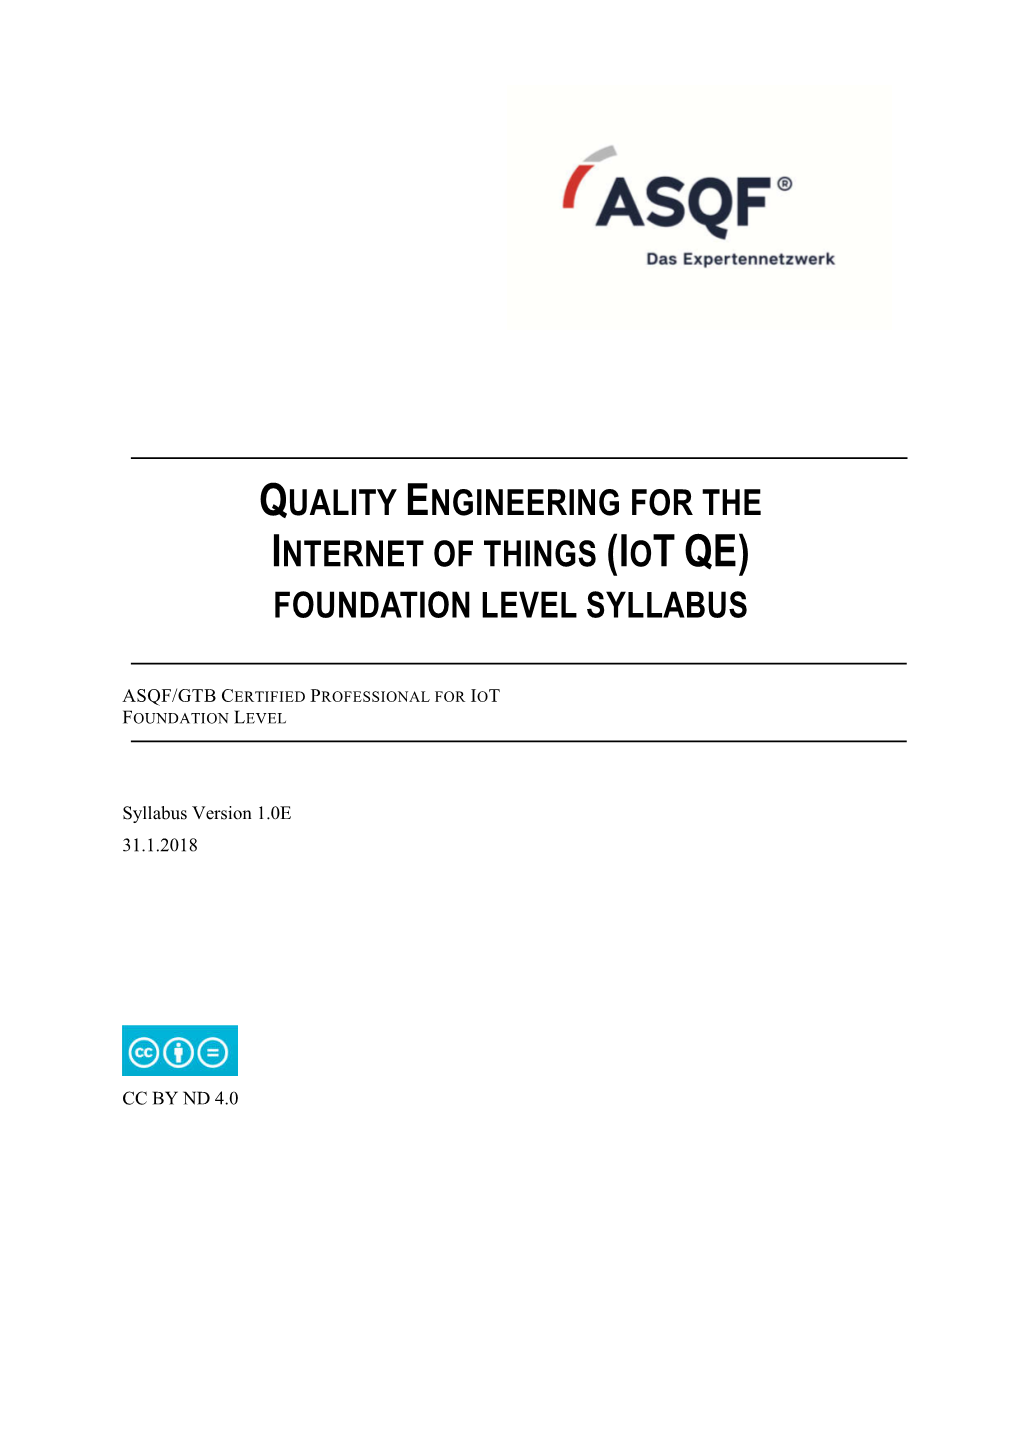 Quality Engineering for the Internet of Things (Iot Qe)